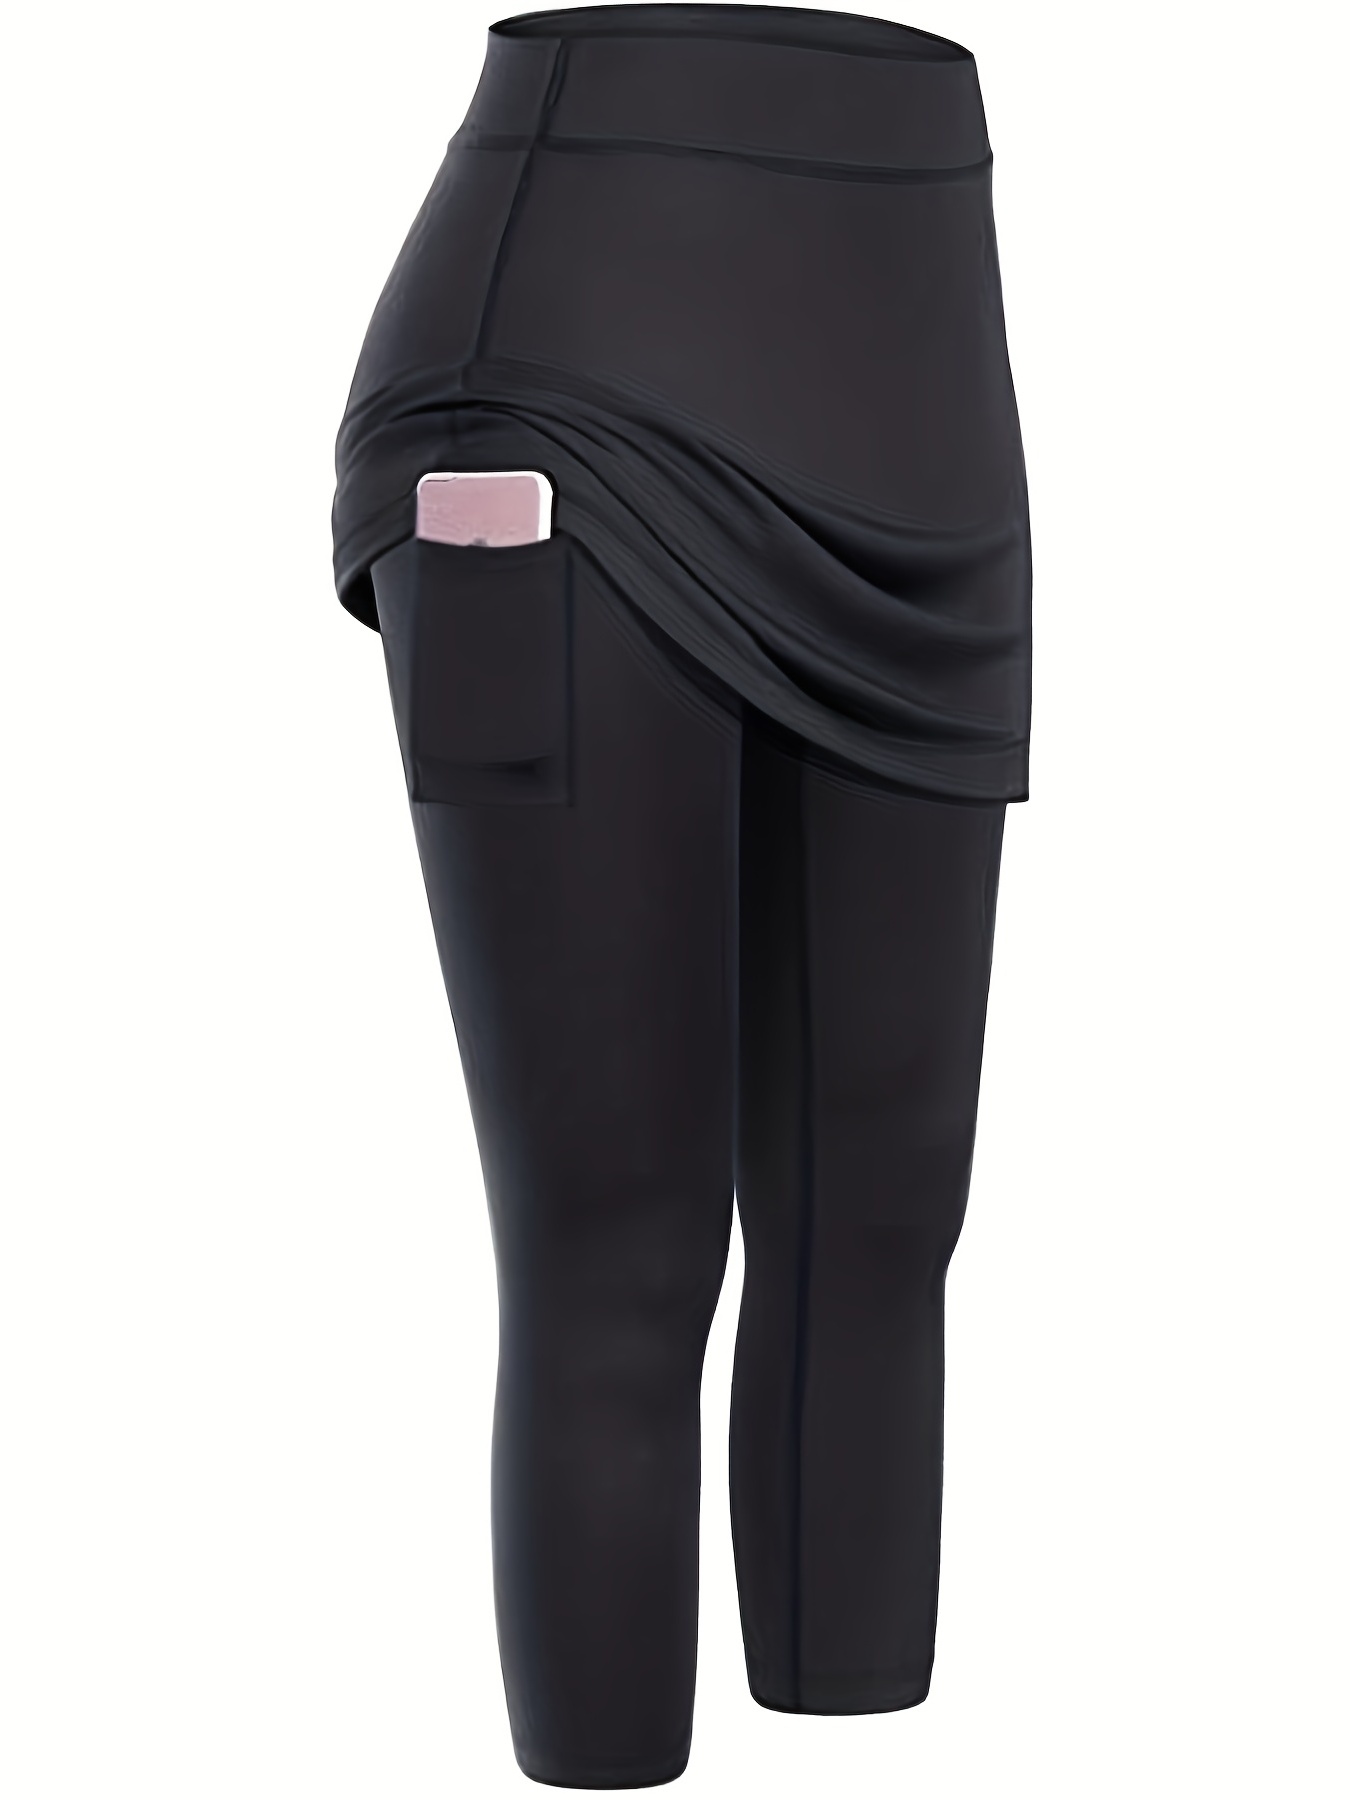 Stretchy Yoga Skirted Leggings For Women - Comfortable Workout